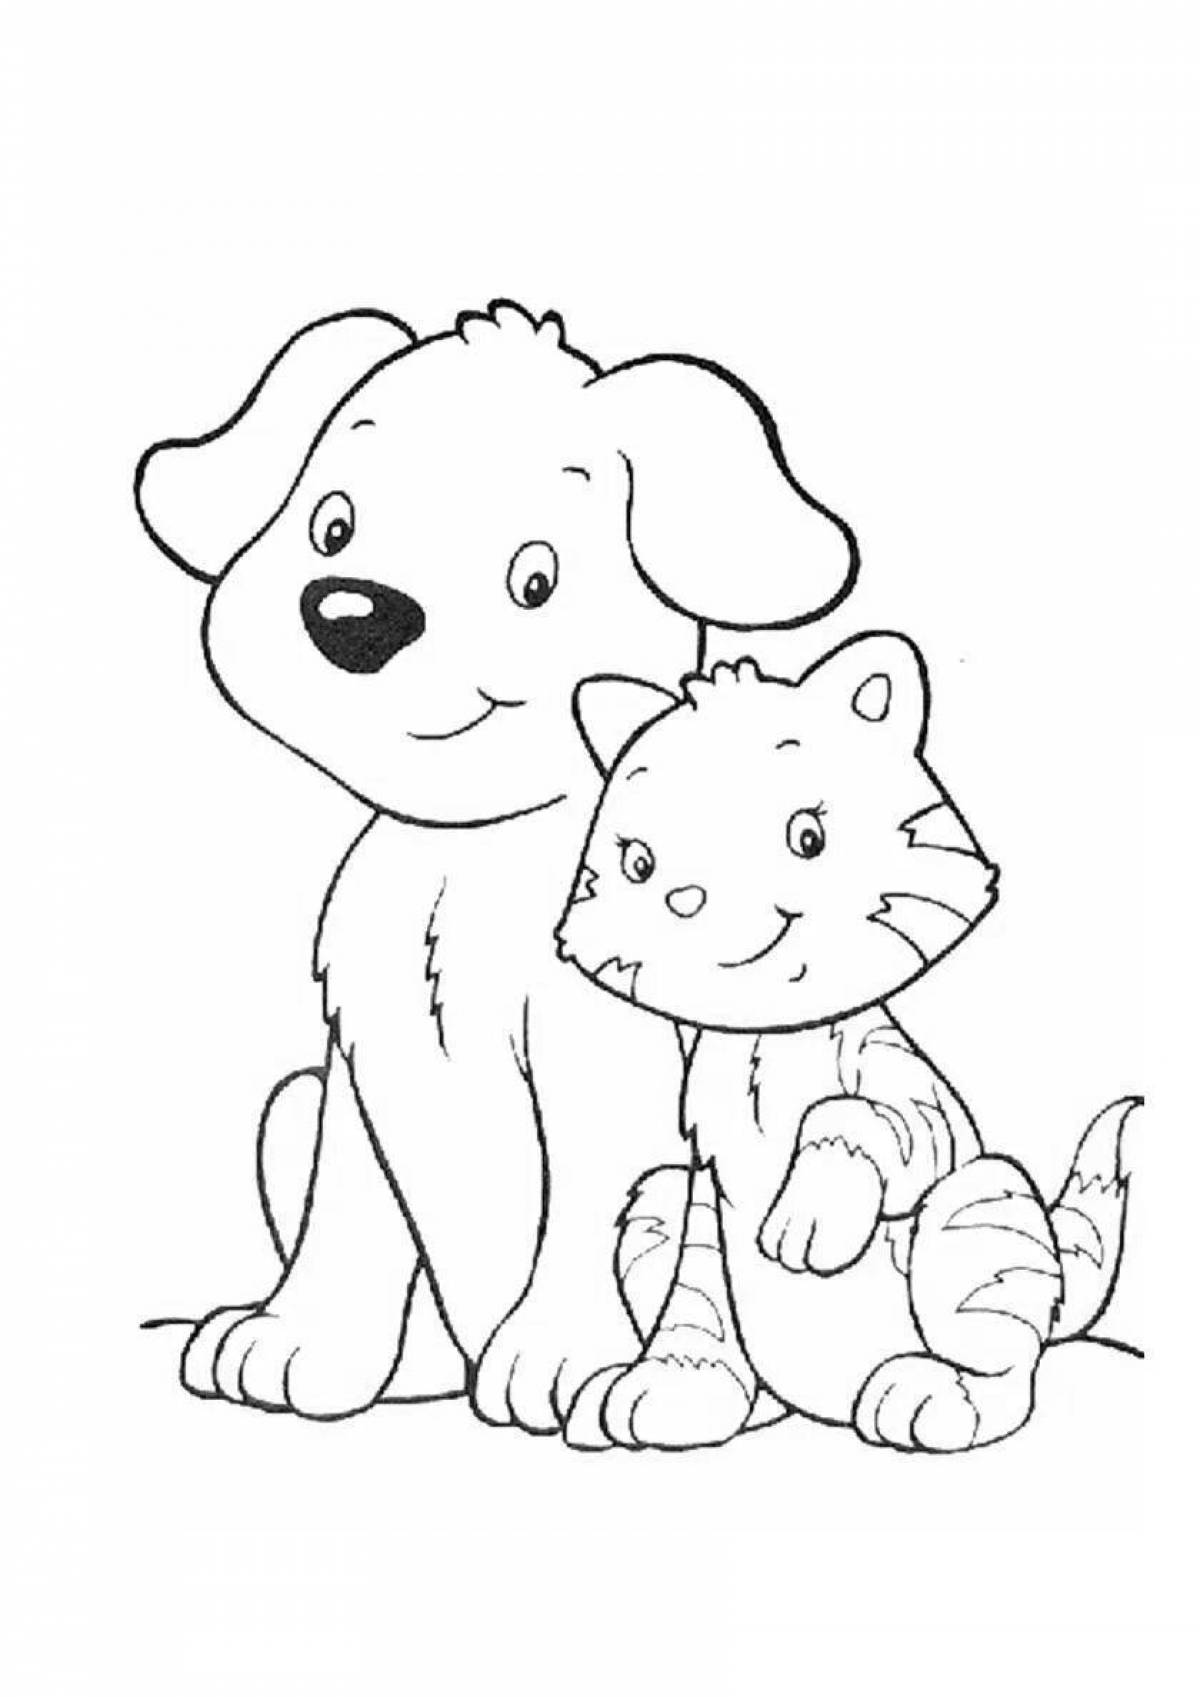 Great coloring book for dogs and cats